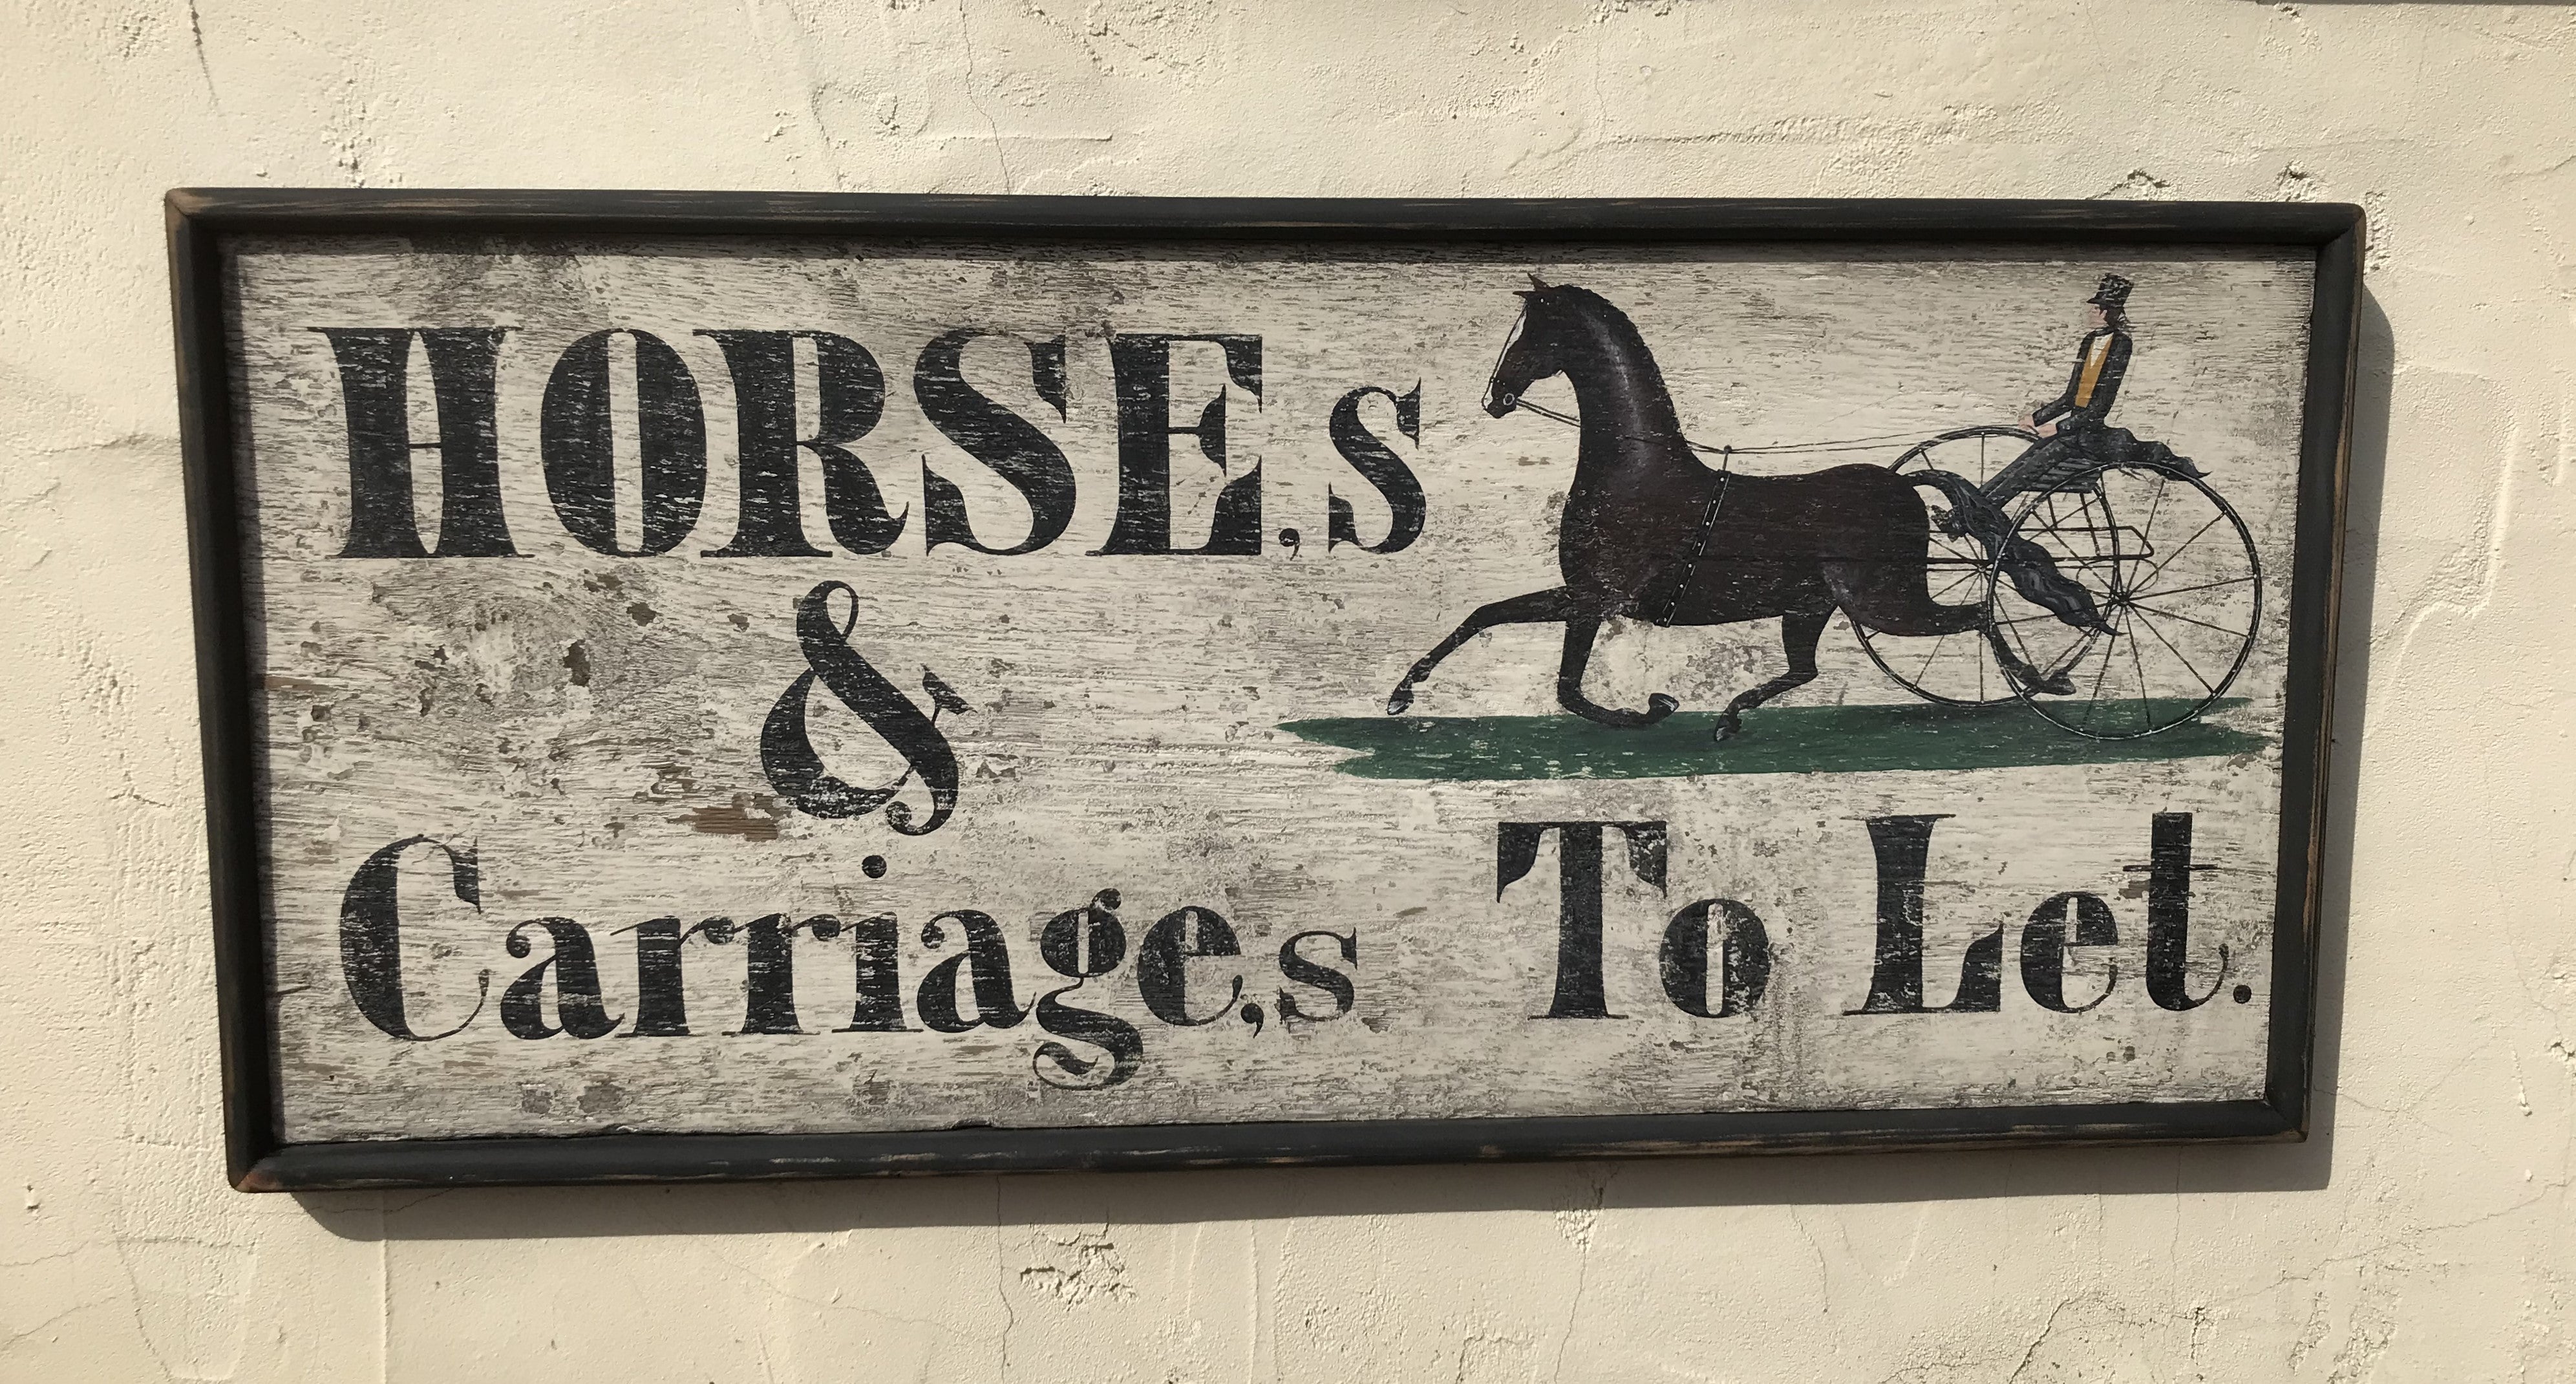 Horses and Carriages To Let